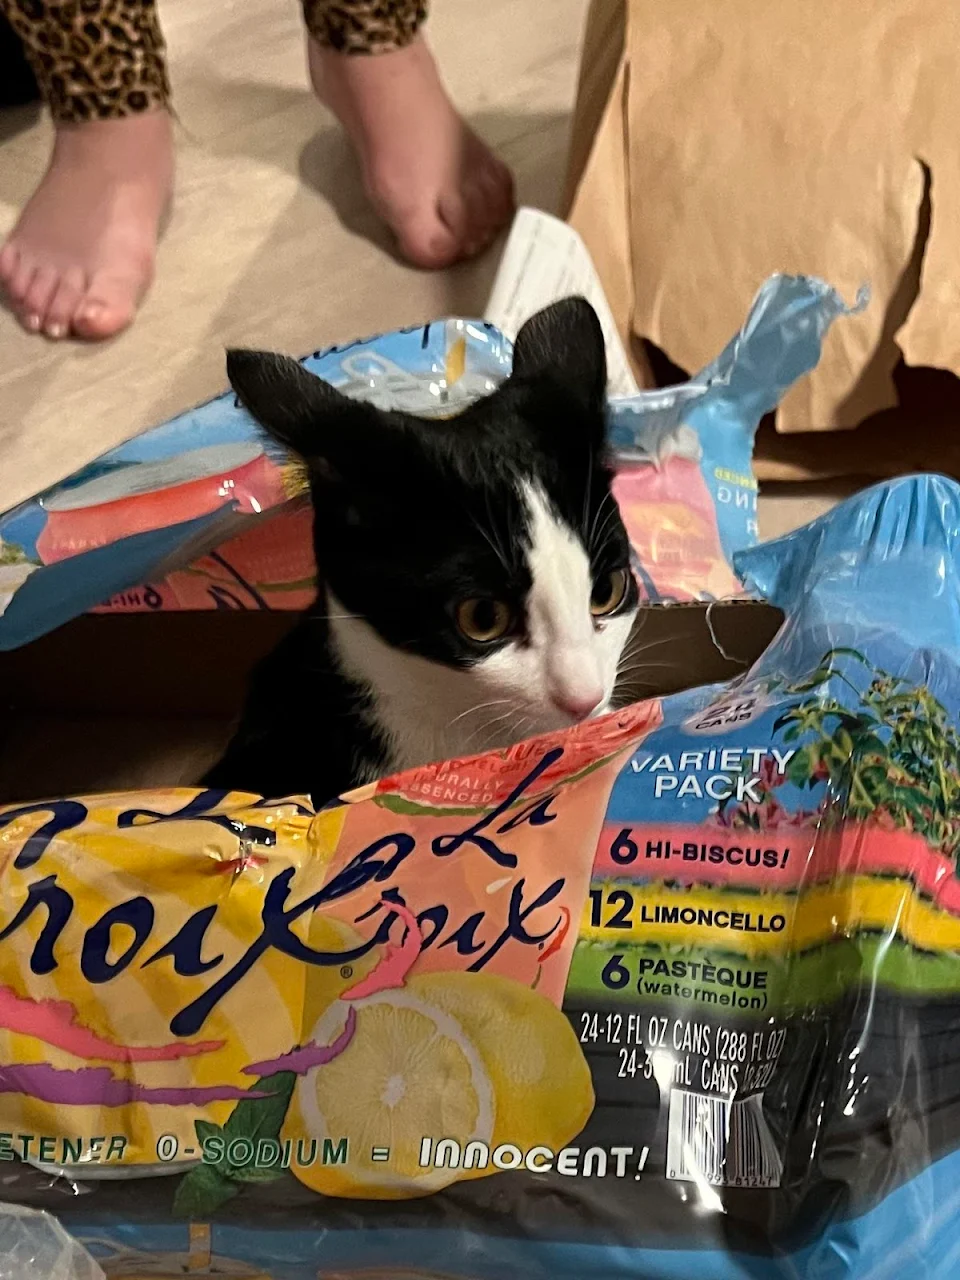 The package says innocent. The face says guilty.